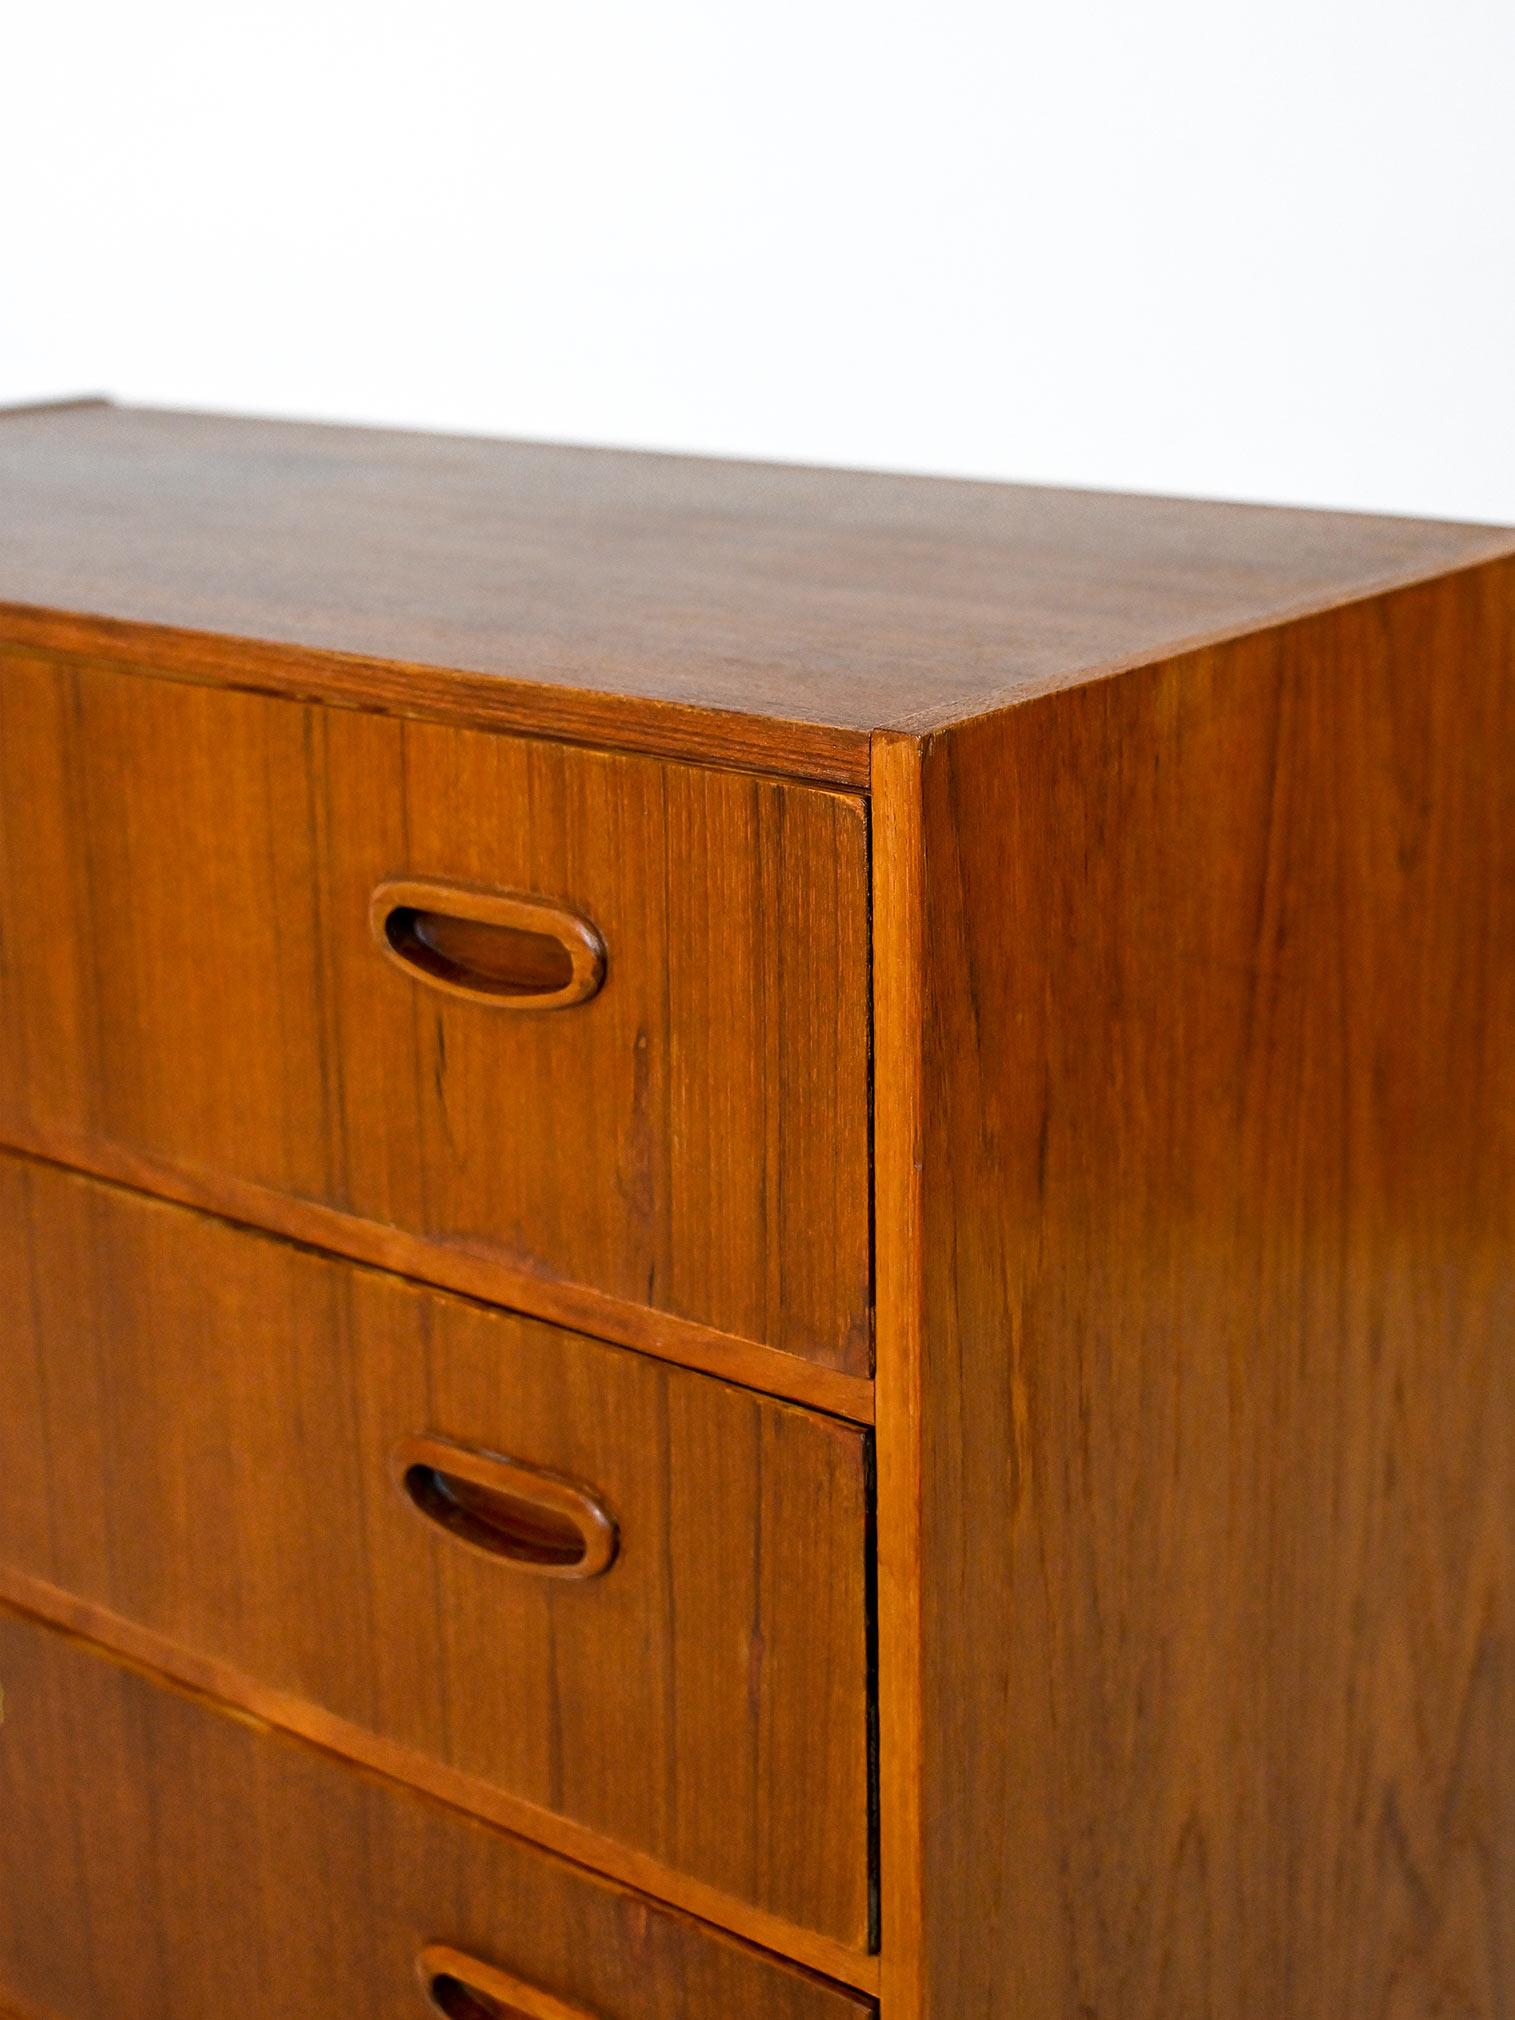 Teak chest of drawers with lockable drawers For Sale 1